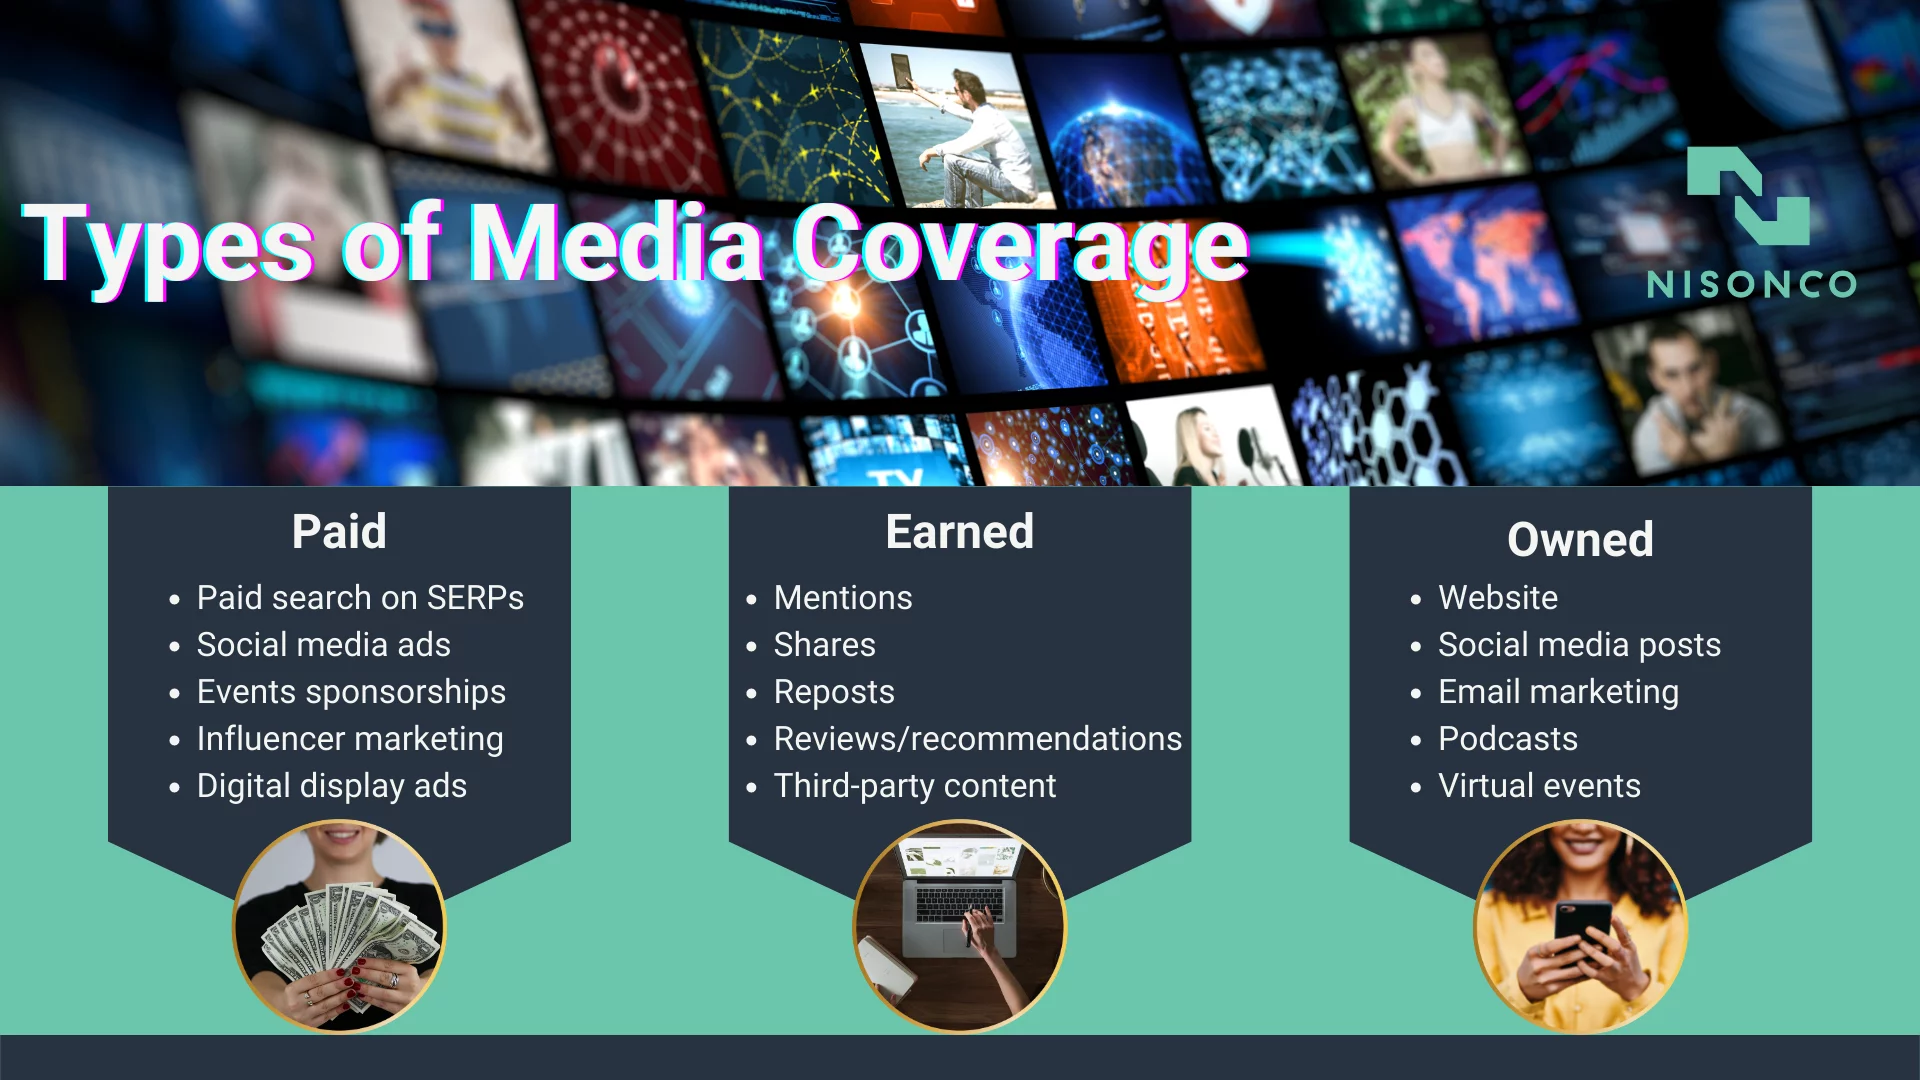 The differences between Paid, Earned and Owned Media Coverage types are listed.